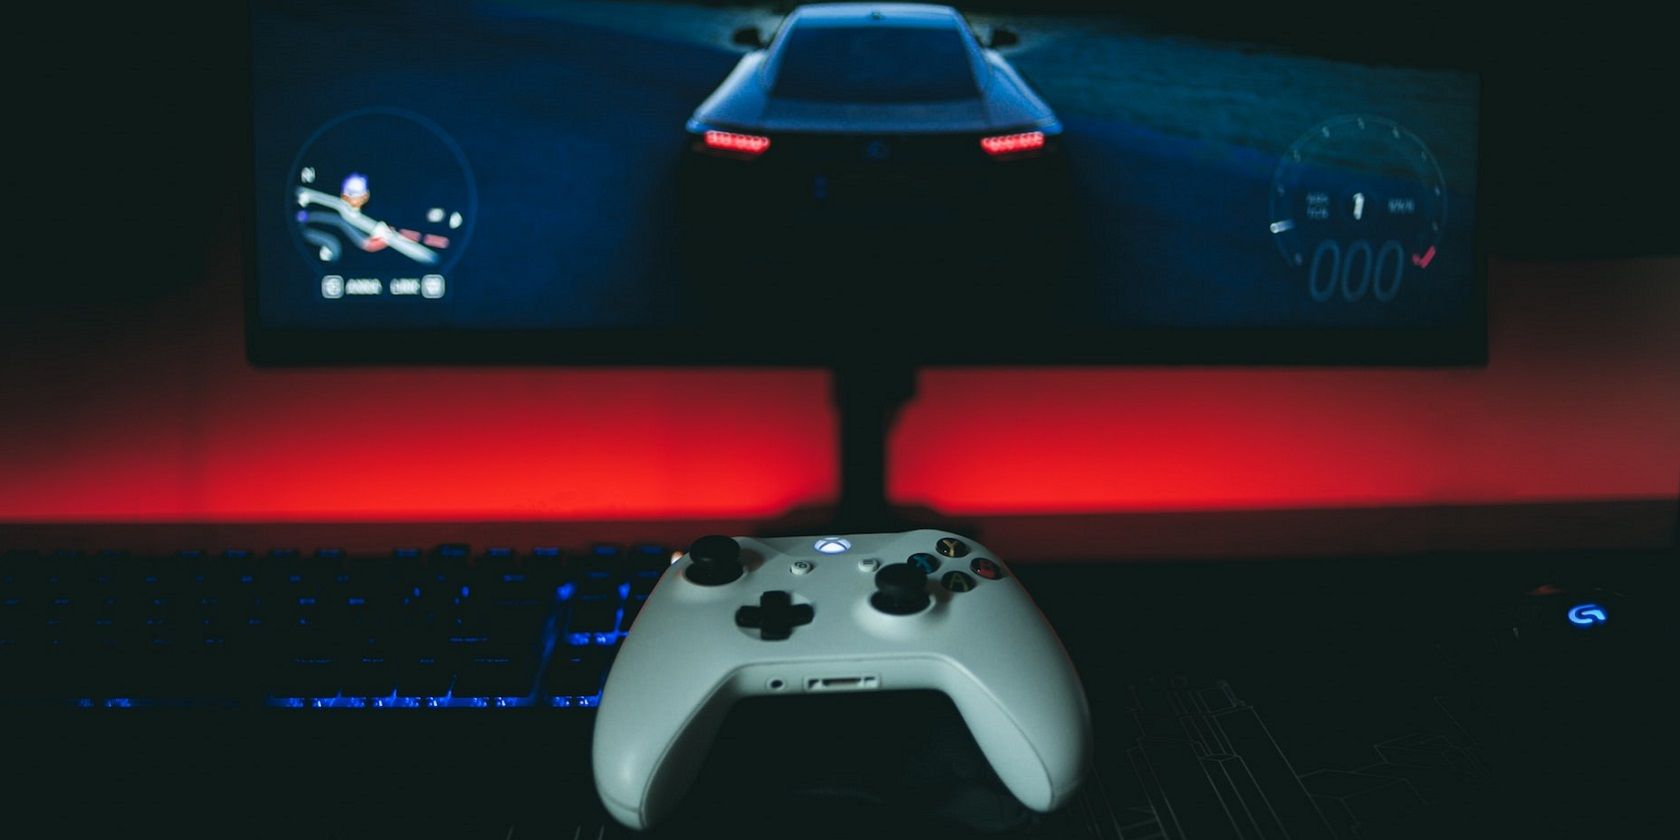 A gaming PC and Xbox controller